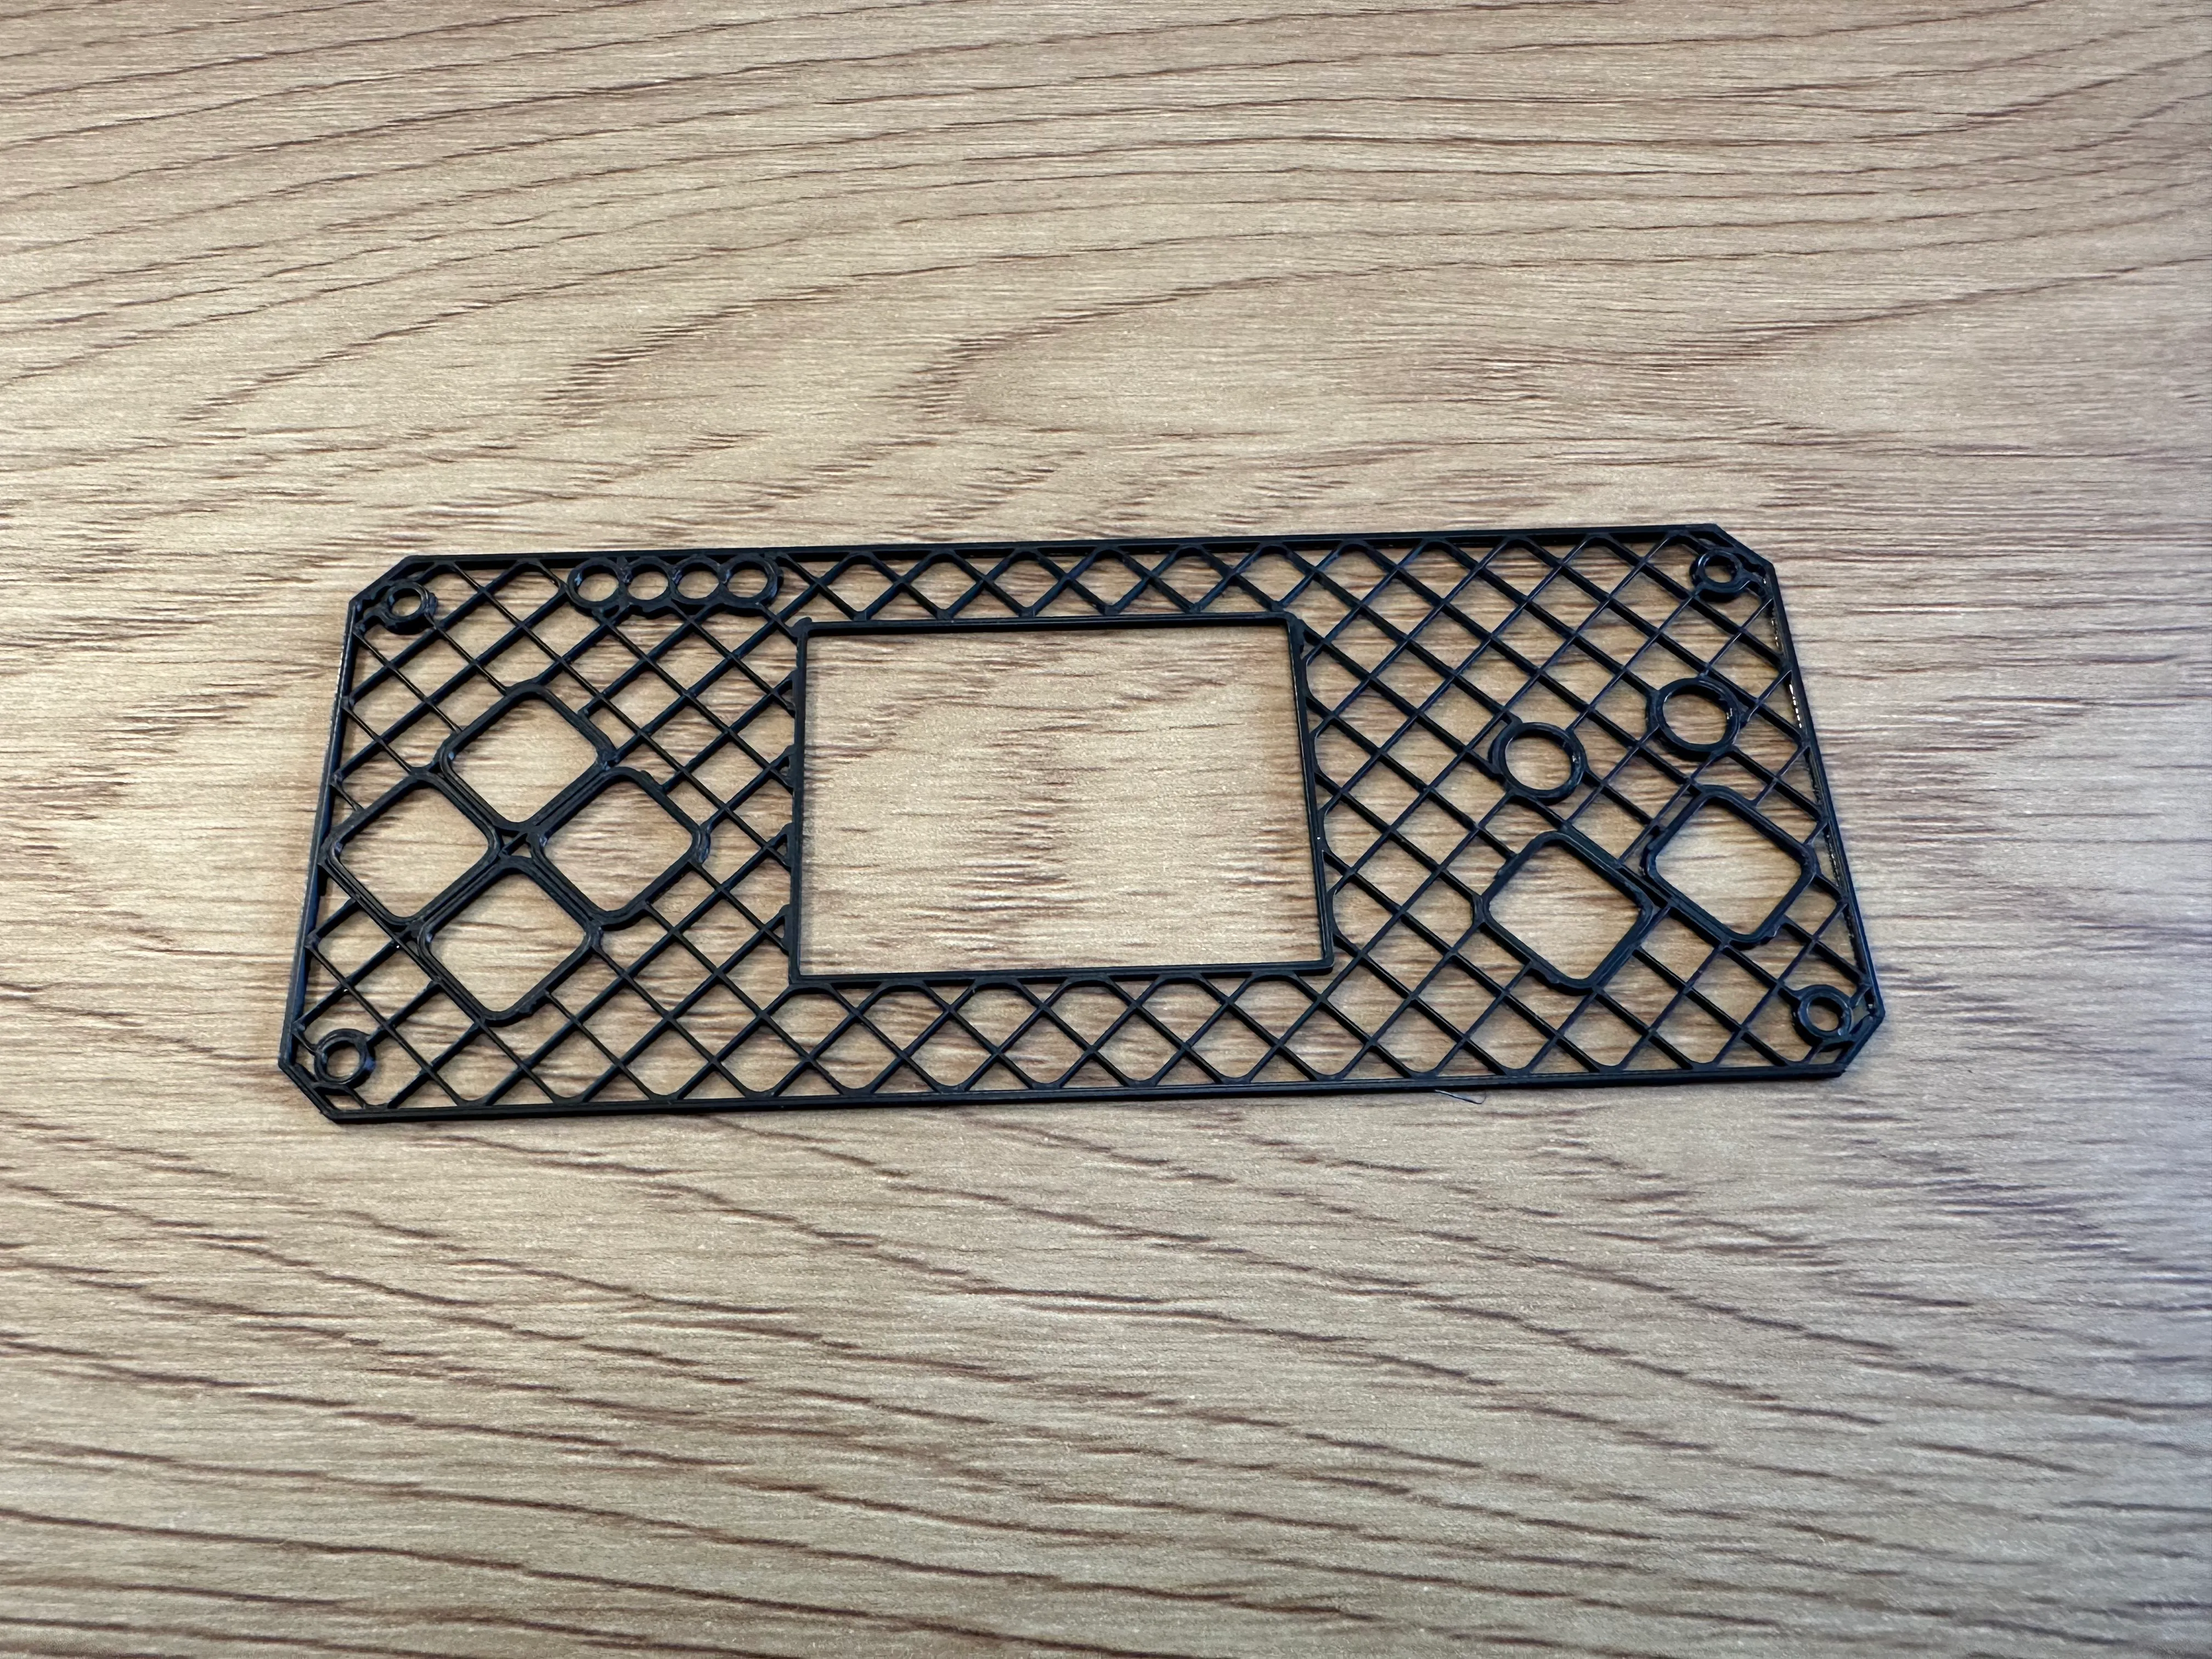 3D-printed draft of the top plate